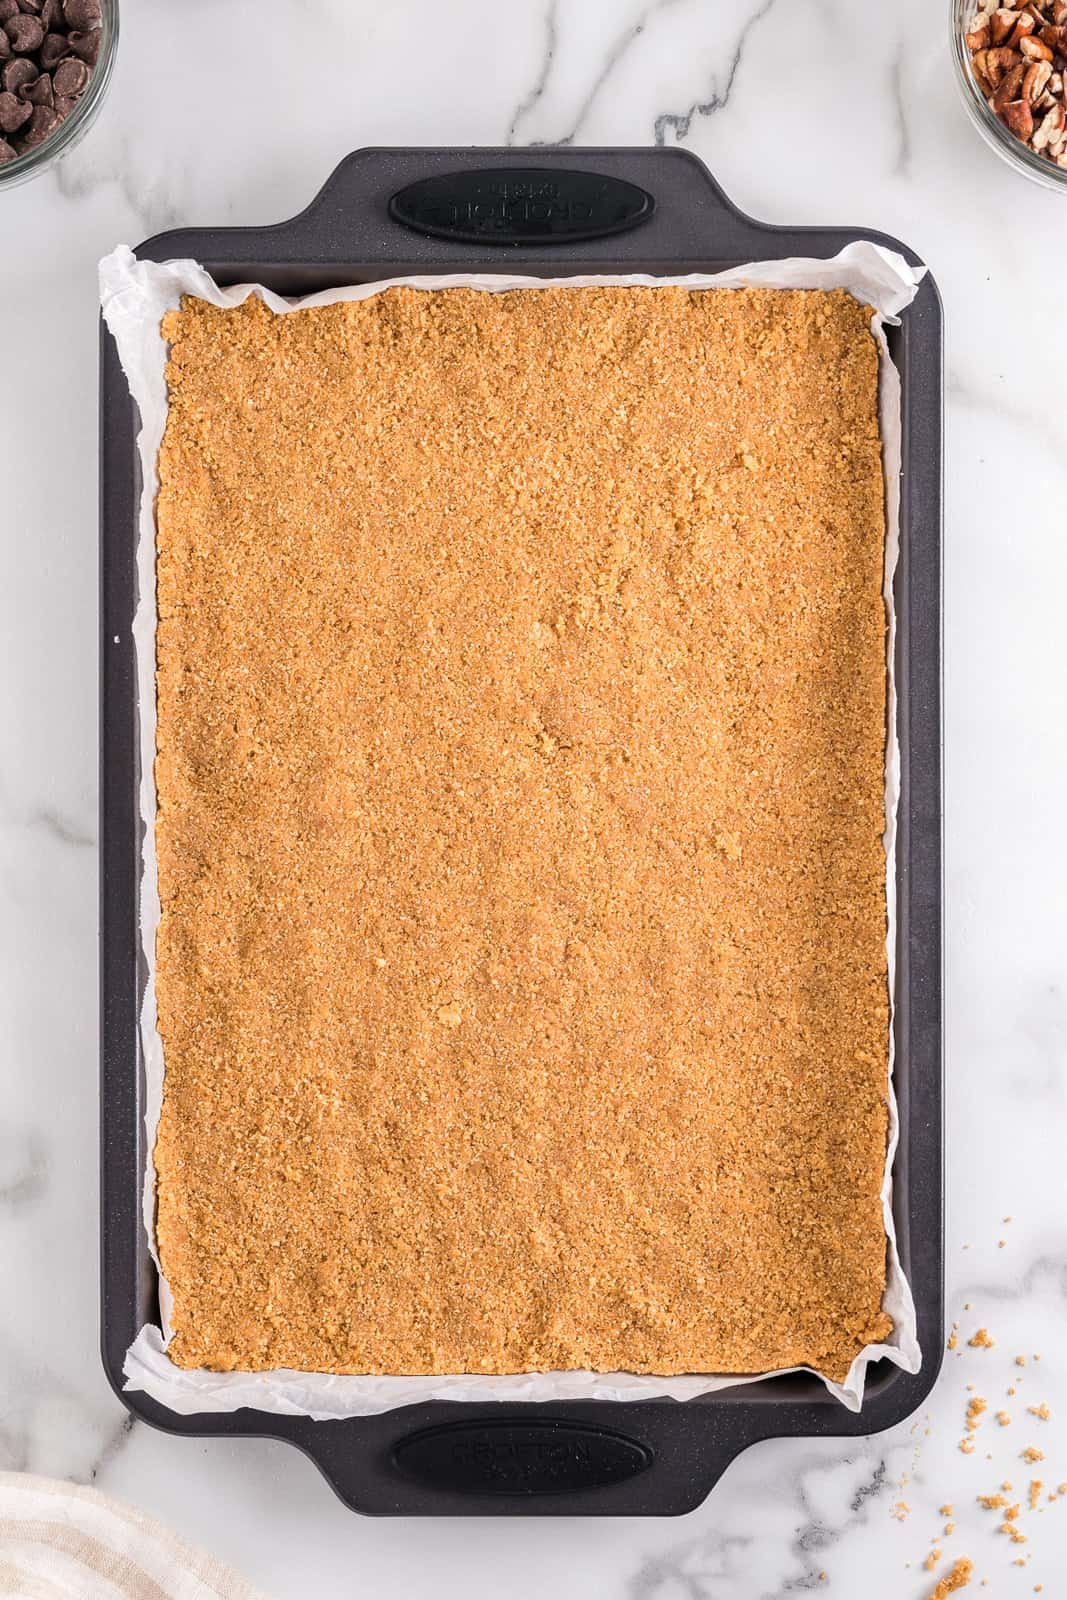 Graham cracker crumb crust on a baking sheet lined with parchment paper.